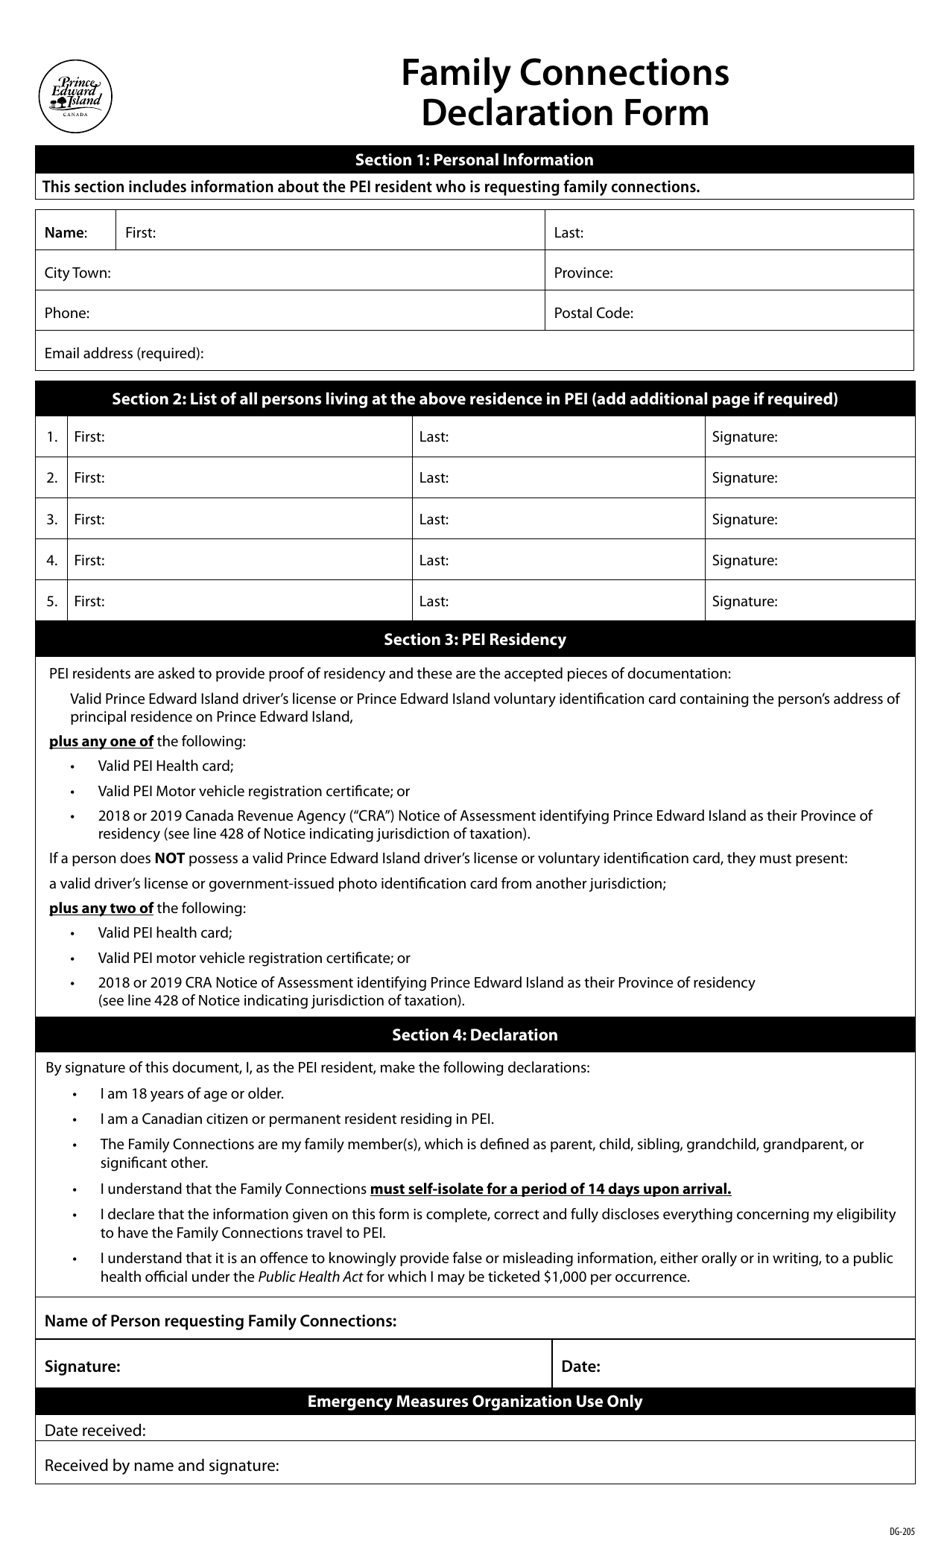 Form DG-205 Family Connections Declaration Form - Prince Edward Island, Canada, Page 1